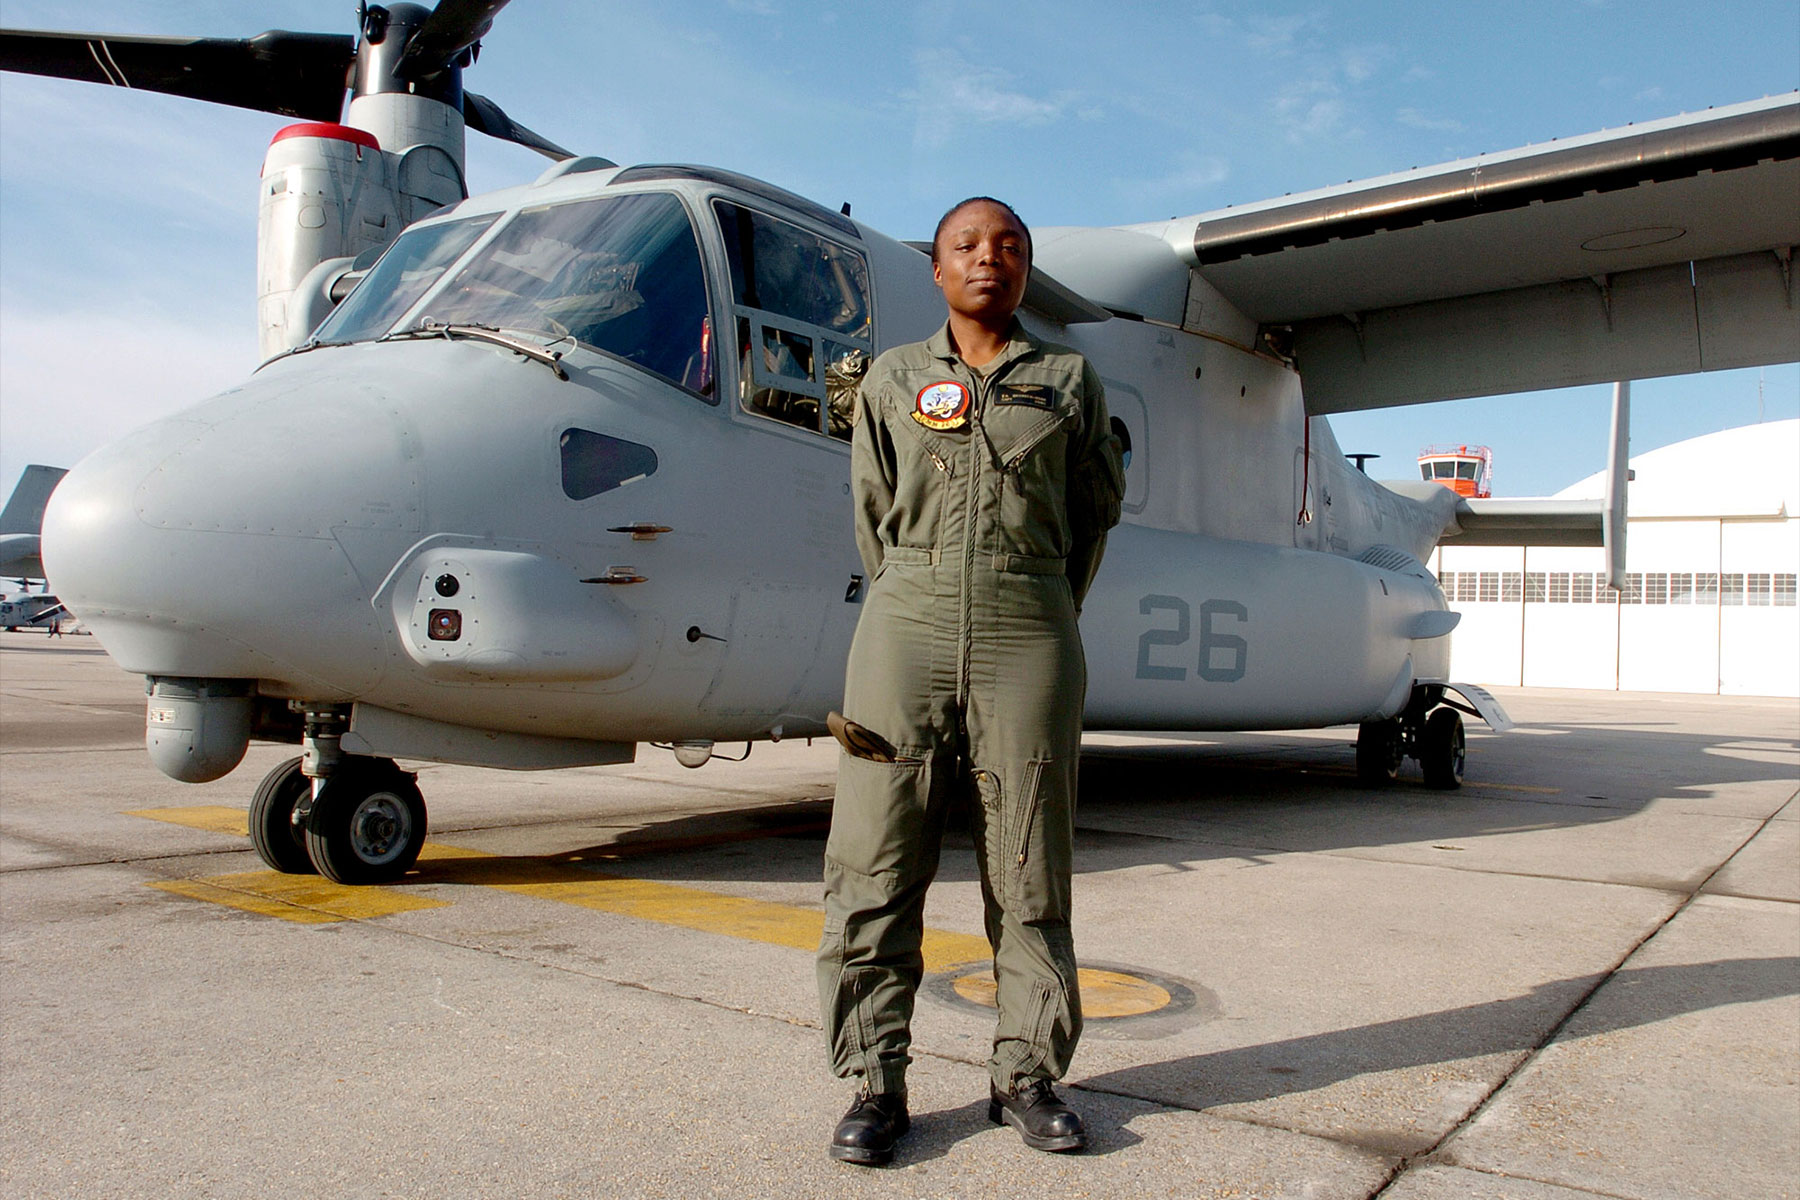 Marine Corps Captain Elizabeth A. Okoreeh-Baah poses in front of an MV-22 Osprey, March 14, 2006. (U.S. Marine Corps/Jonathan A. Tabb)